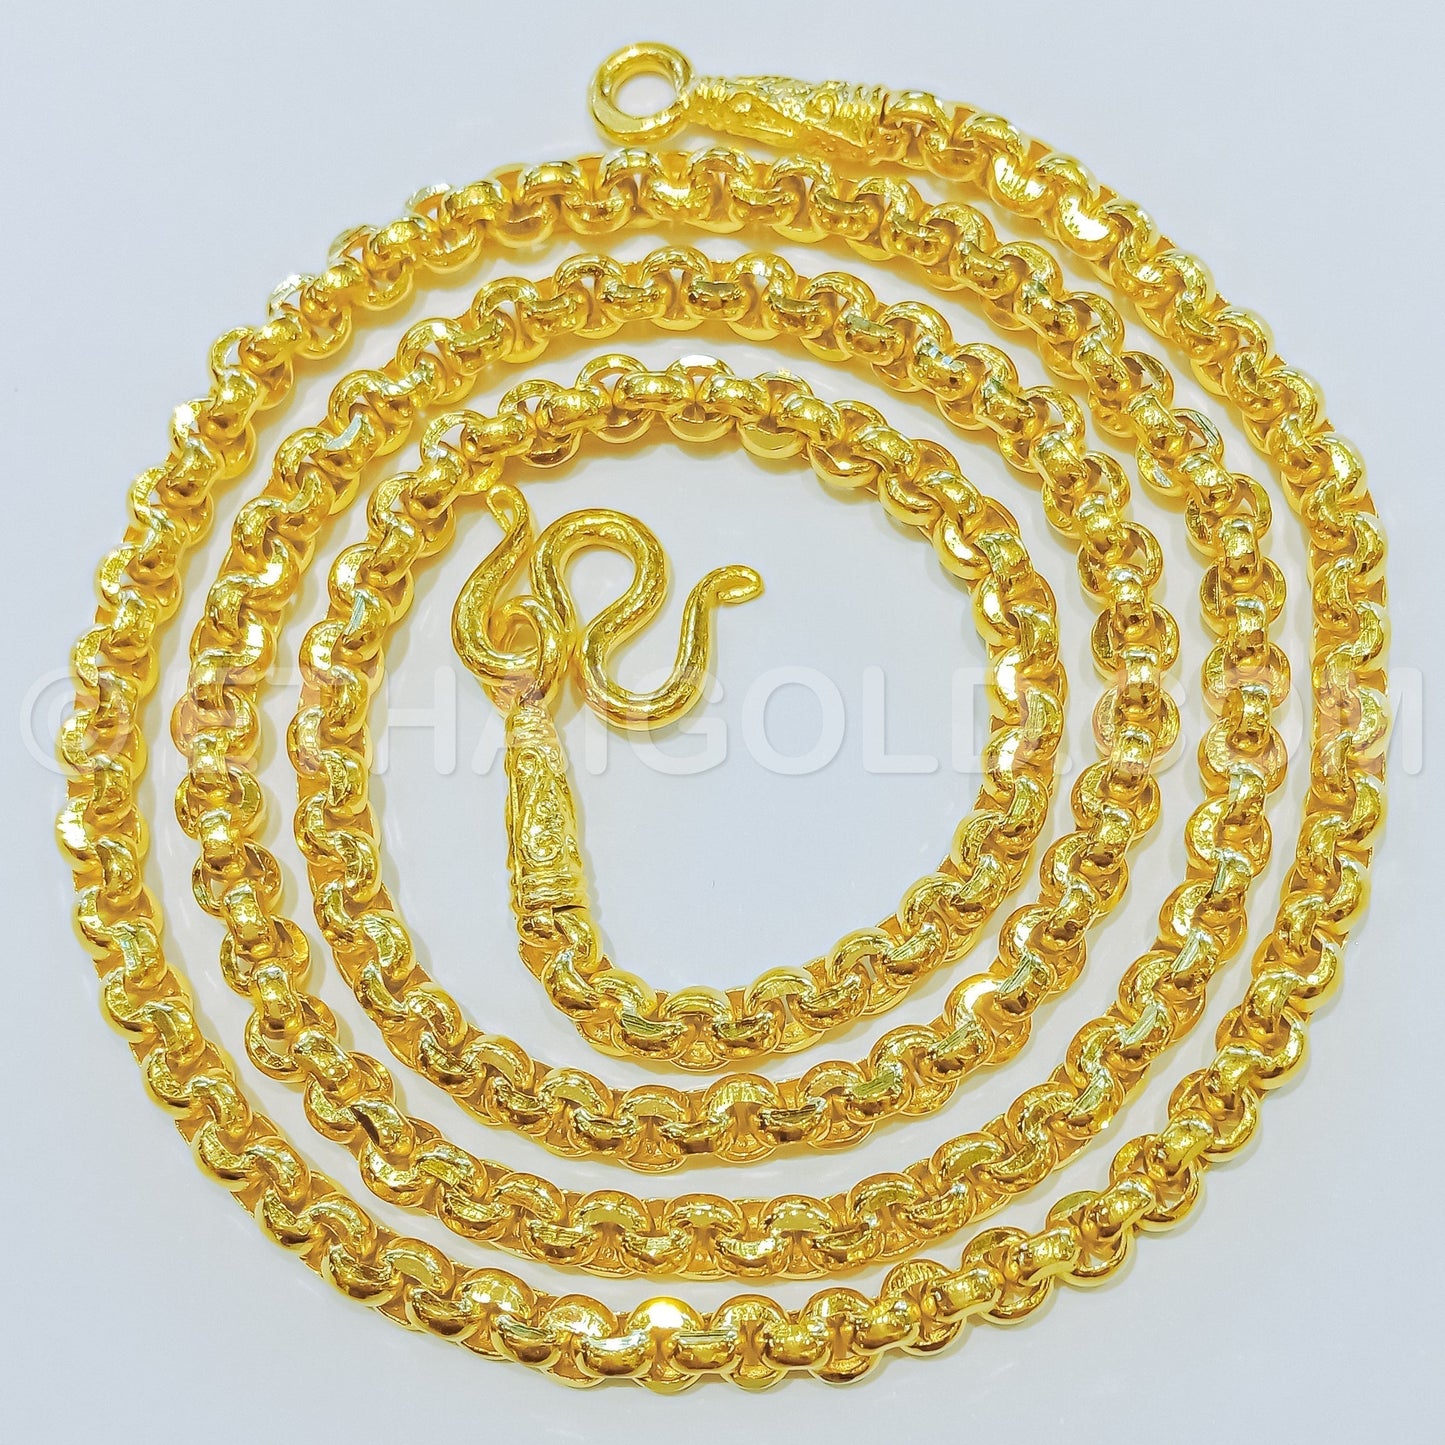 5 BAHT POLISHED DIAMOND-CUT SOLID ROLO CHAIN NECKLACE IN 23K GOLD (ID: N2505B)